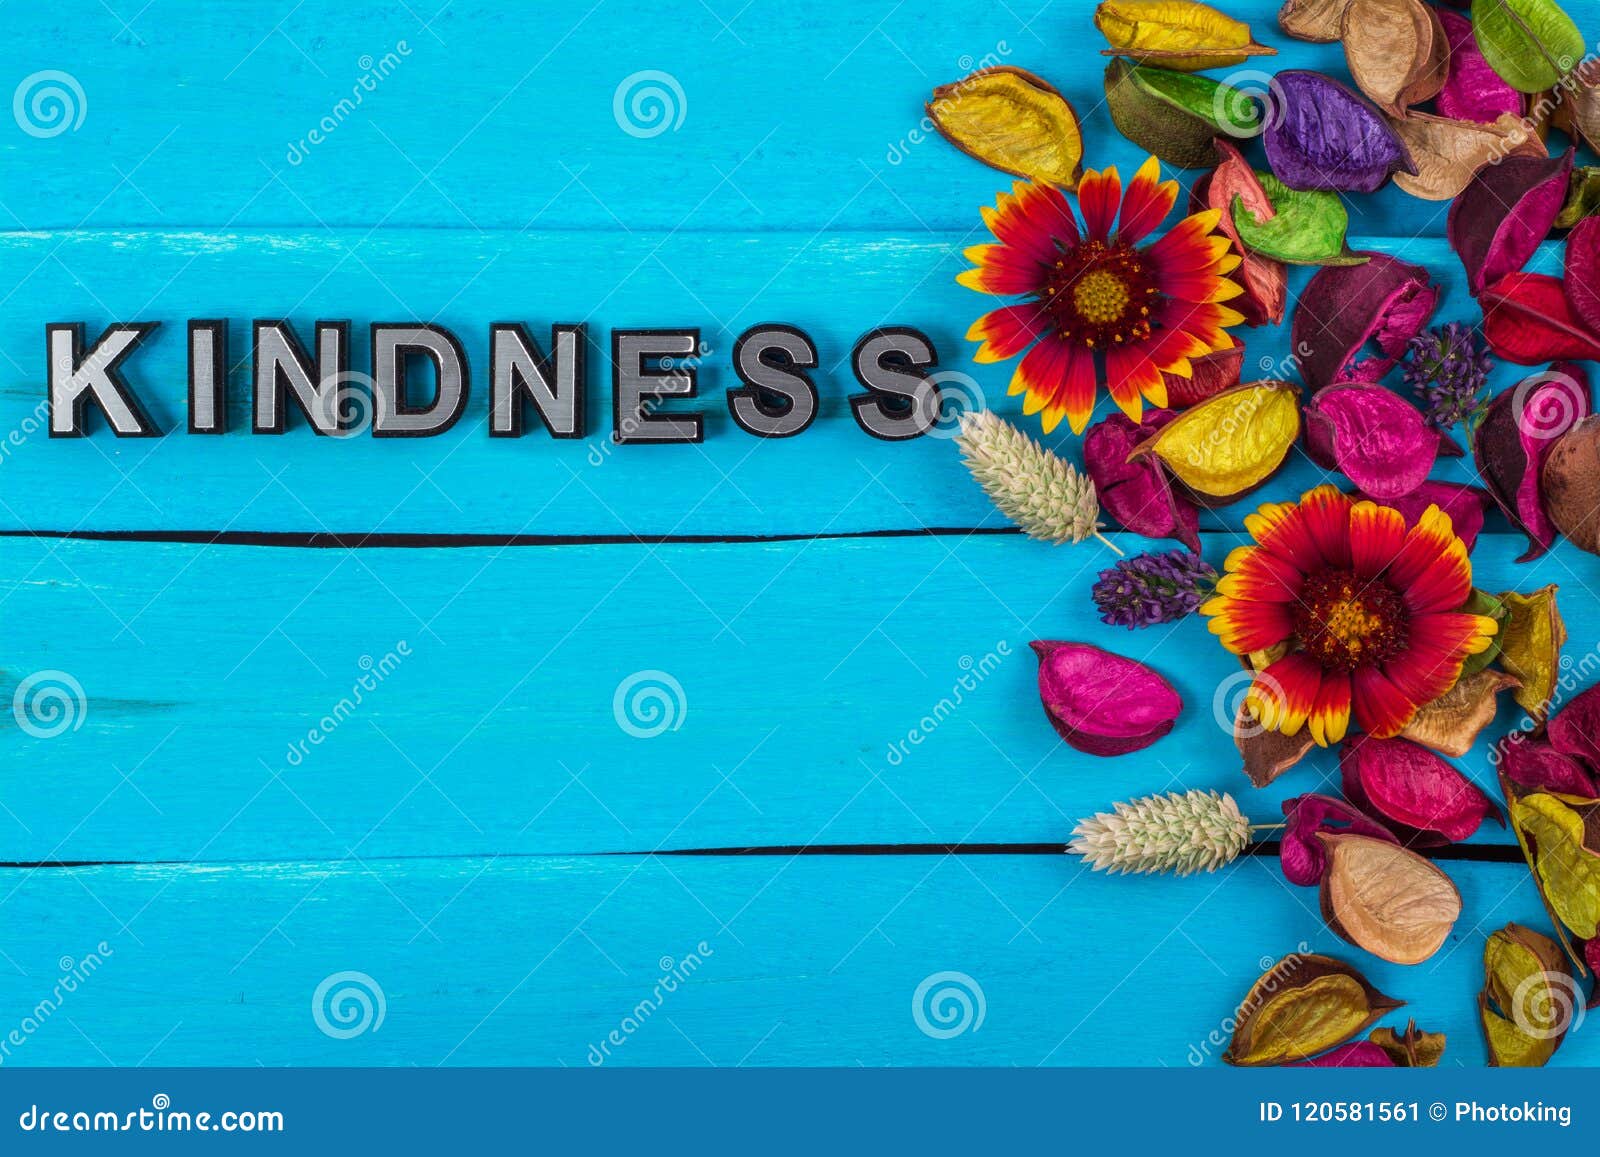 kindness word on blue wood with flower